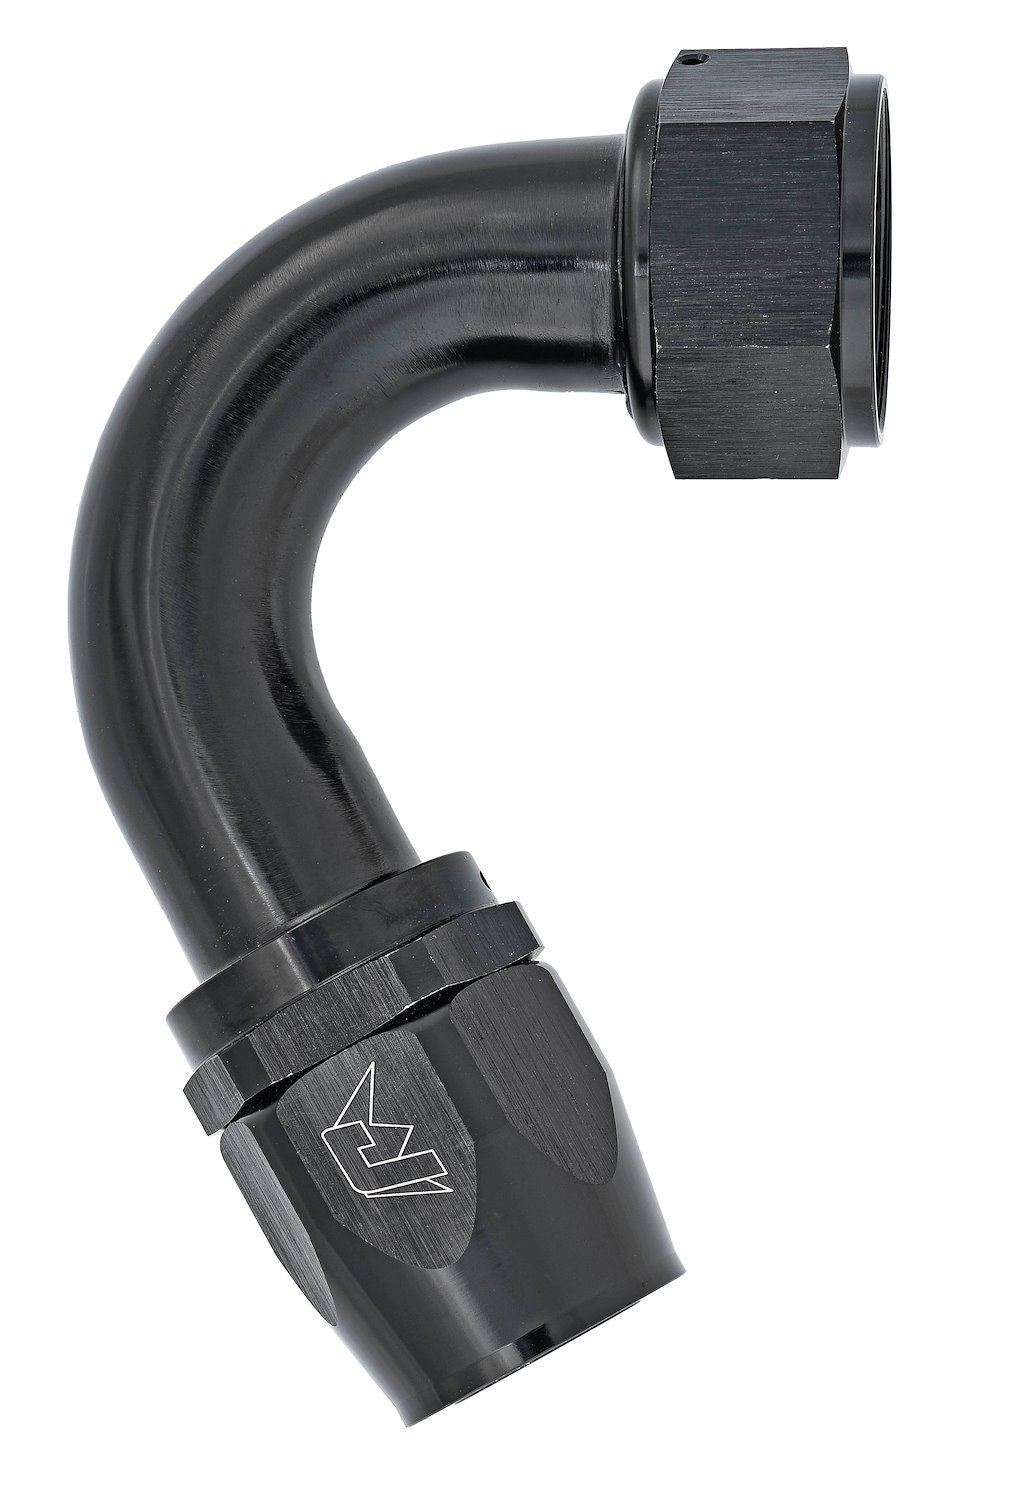 AN 120-Degree Max Flow Swivel Hose End [-20